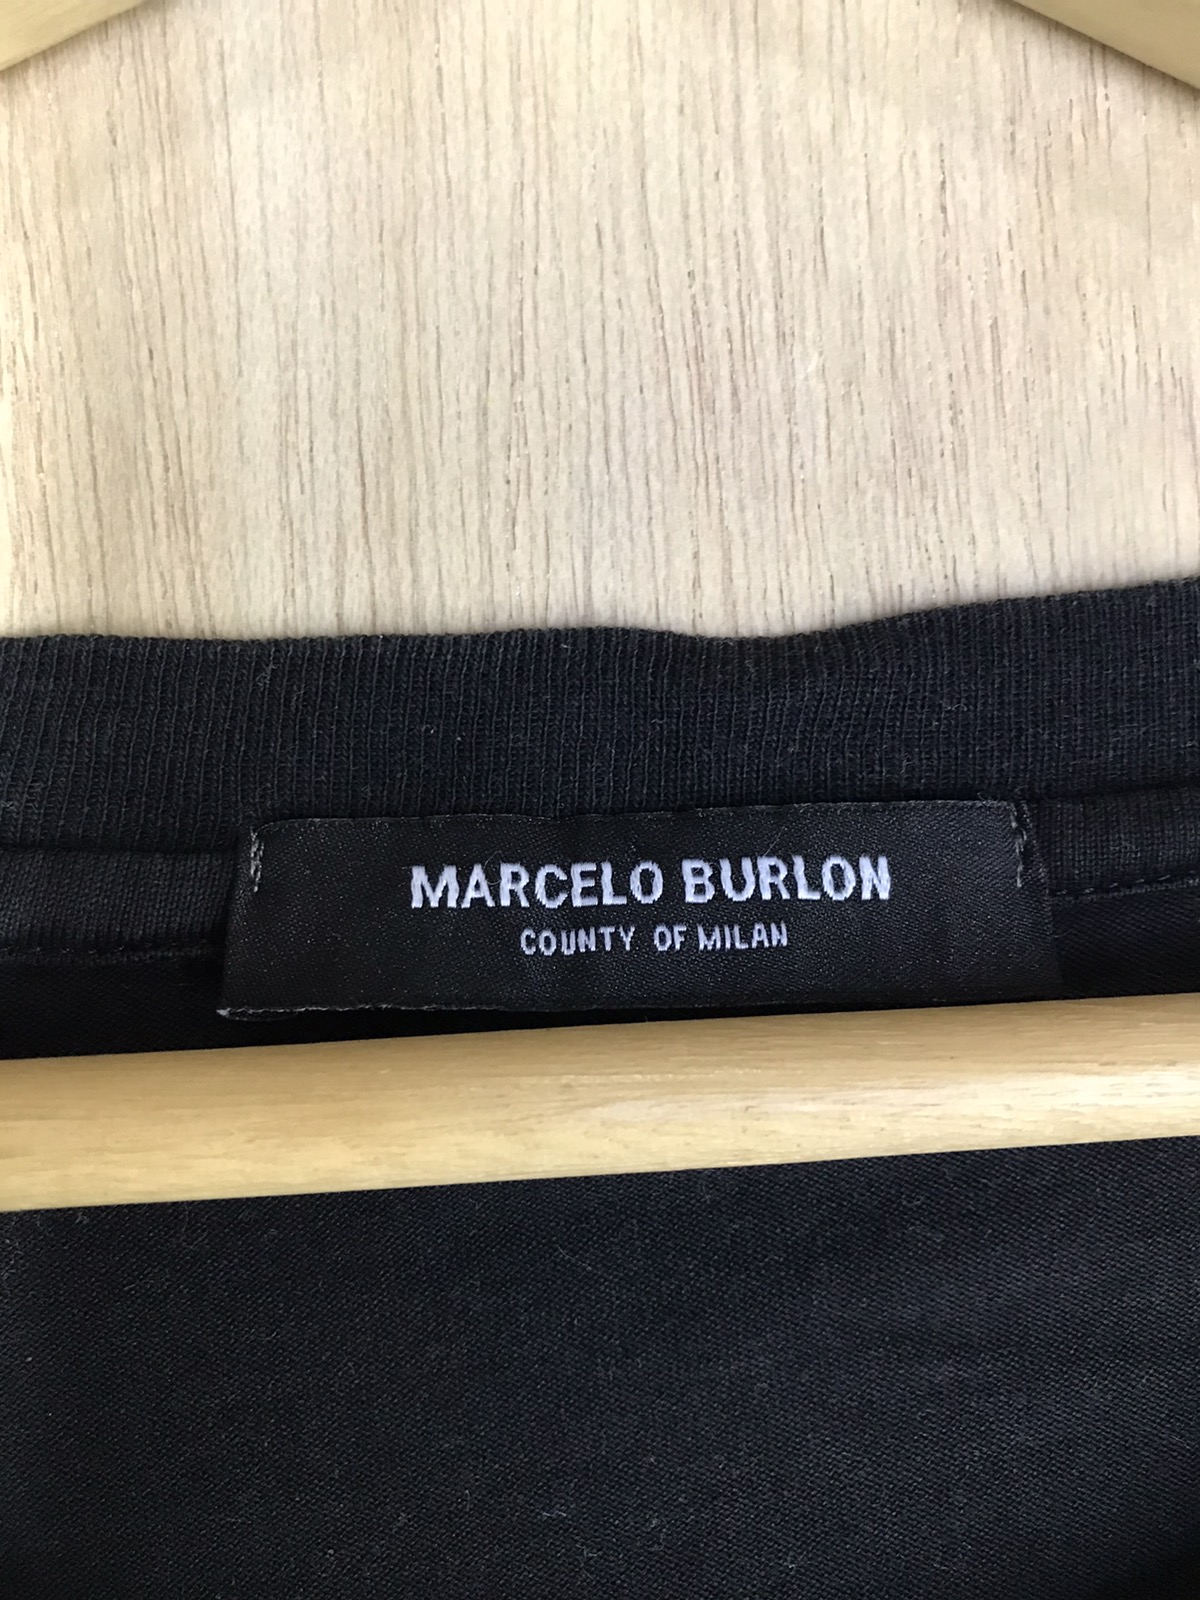 Marcelo Burlon County of Milan Tees Fit to M - 6